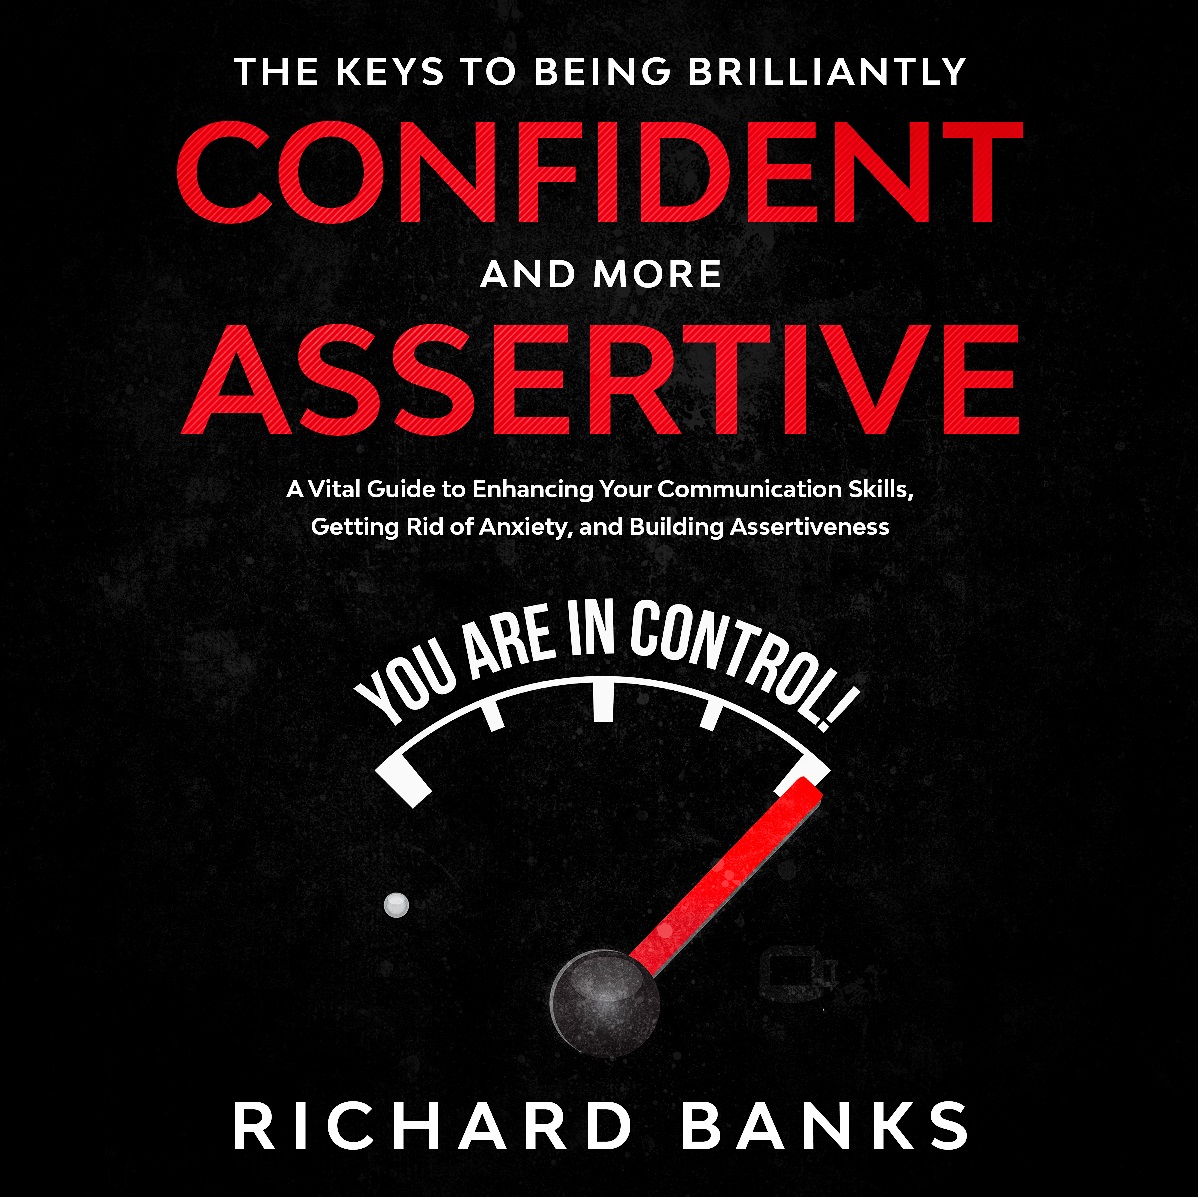 FREE: The Keys to Being Brilliantly Confident and More Assertive by Richard Banks